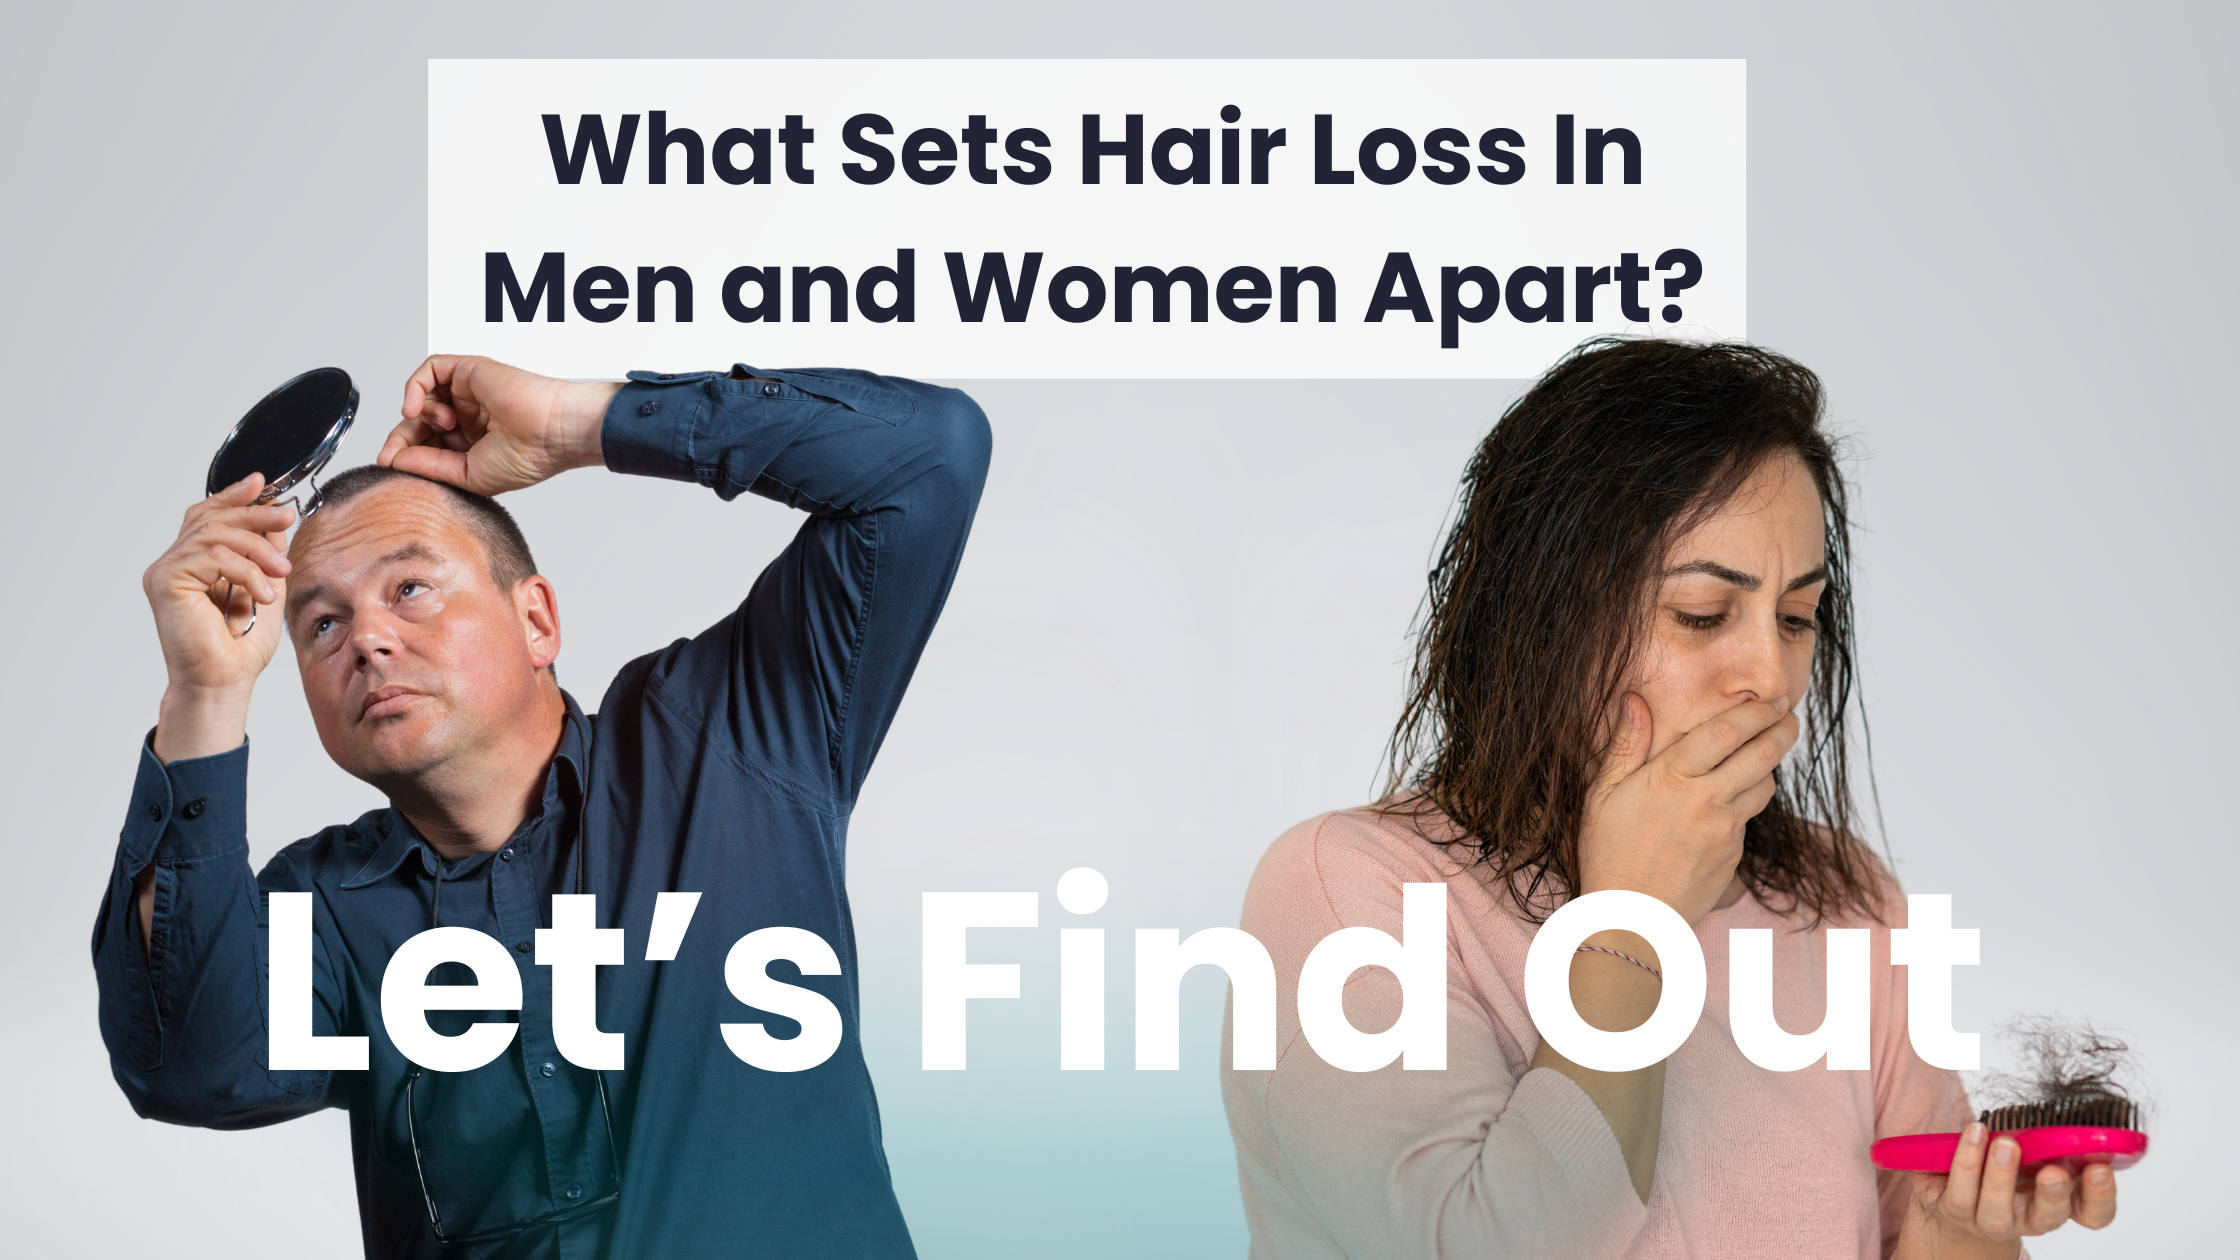 What Sets Hair Loss In Men and Women Apart? Let's Find Out